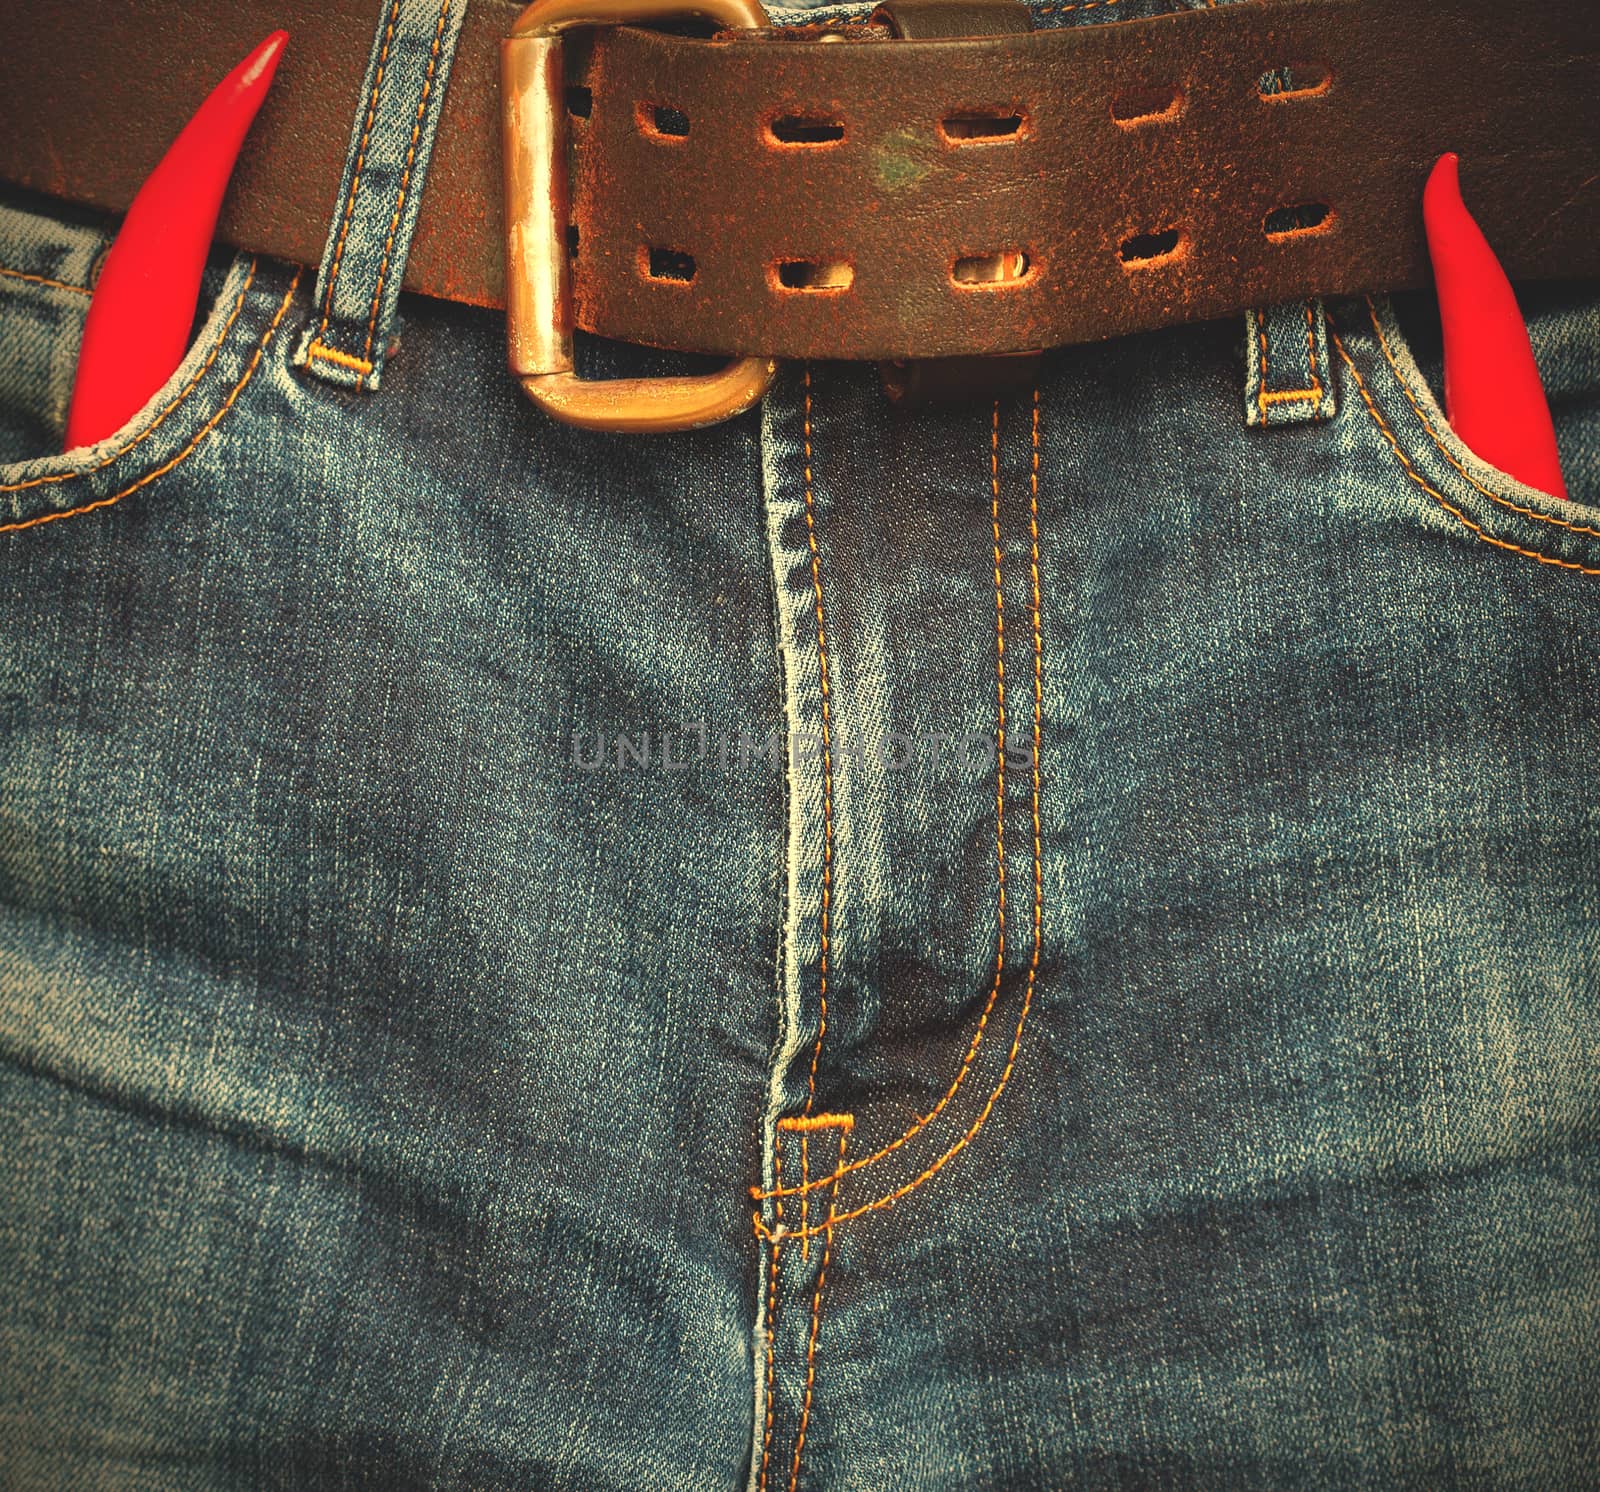 old blue jeans with red chili pepper in the pockets. instagram image style